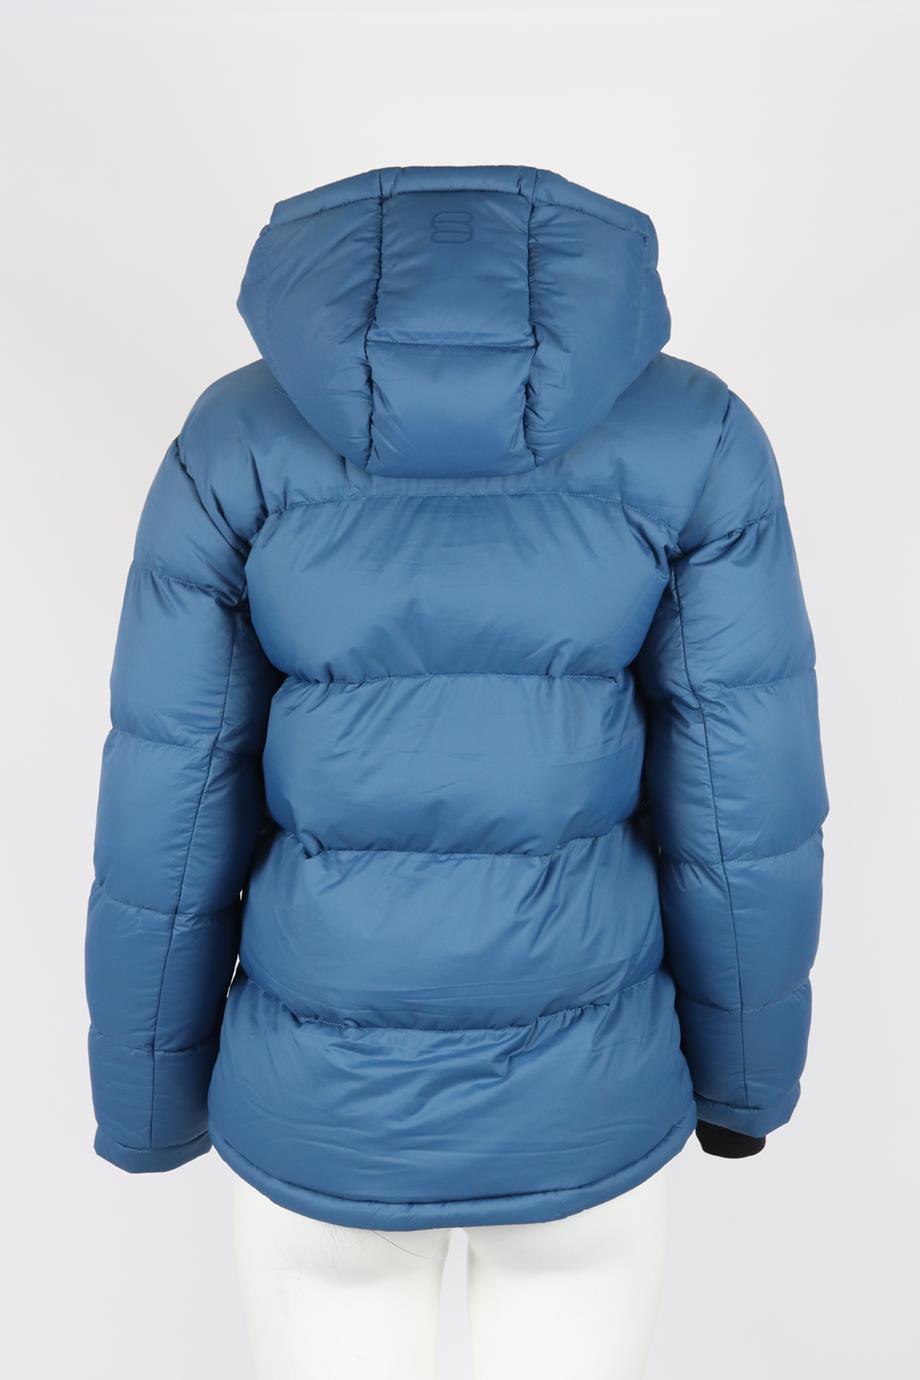 SUPER WORLD HOODED QUILTED PADDED SHELL JACKET XSMALL